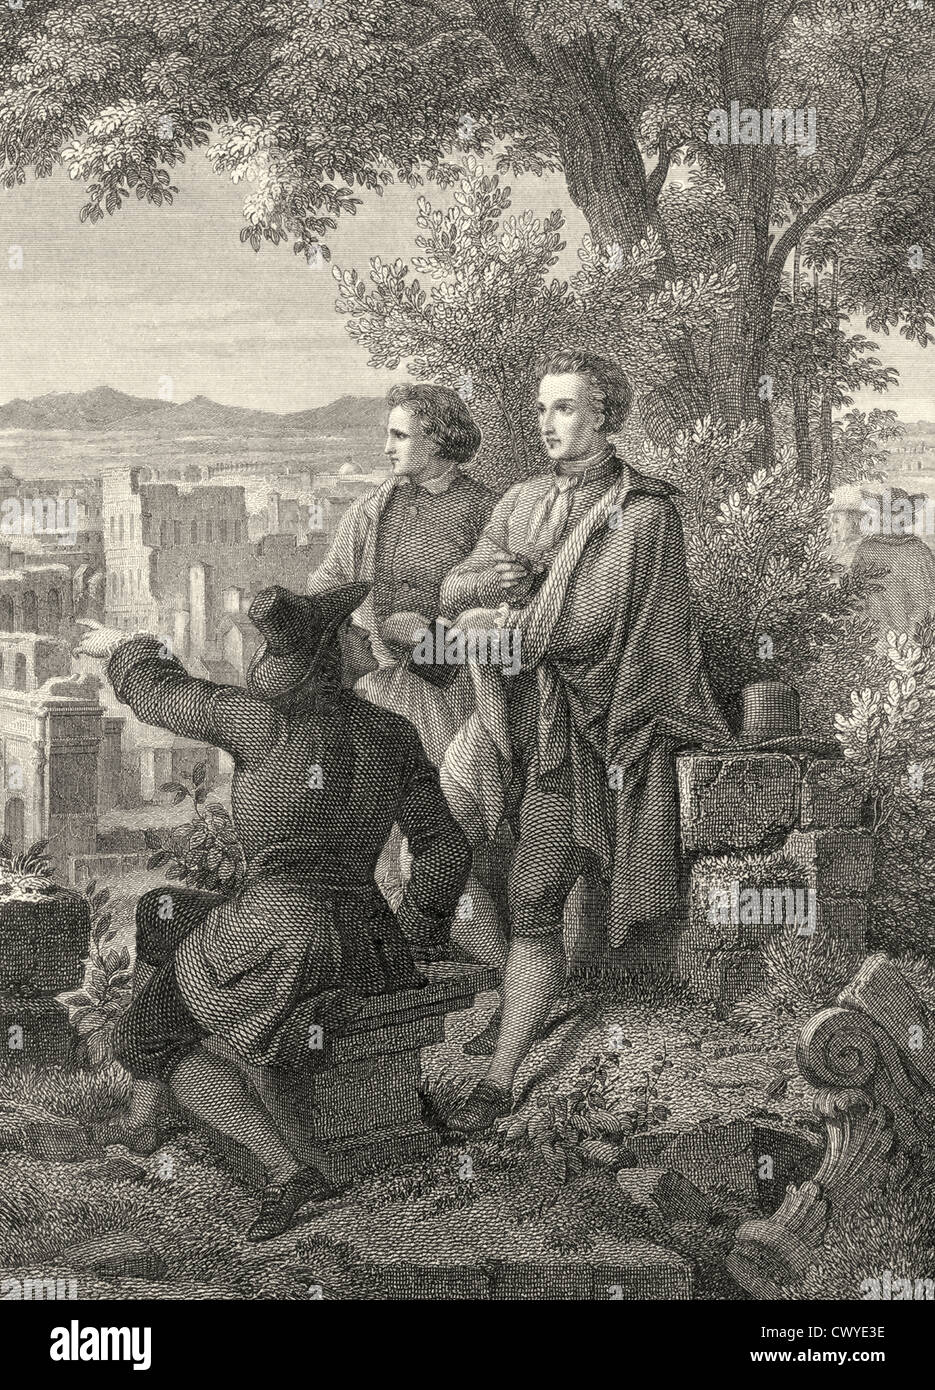 scene from The Italian journey, a travel book by Johann Wolfgang von Goethe, Stock Photo